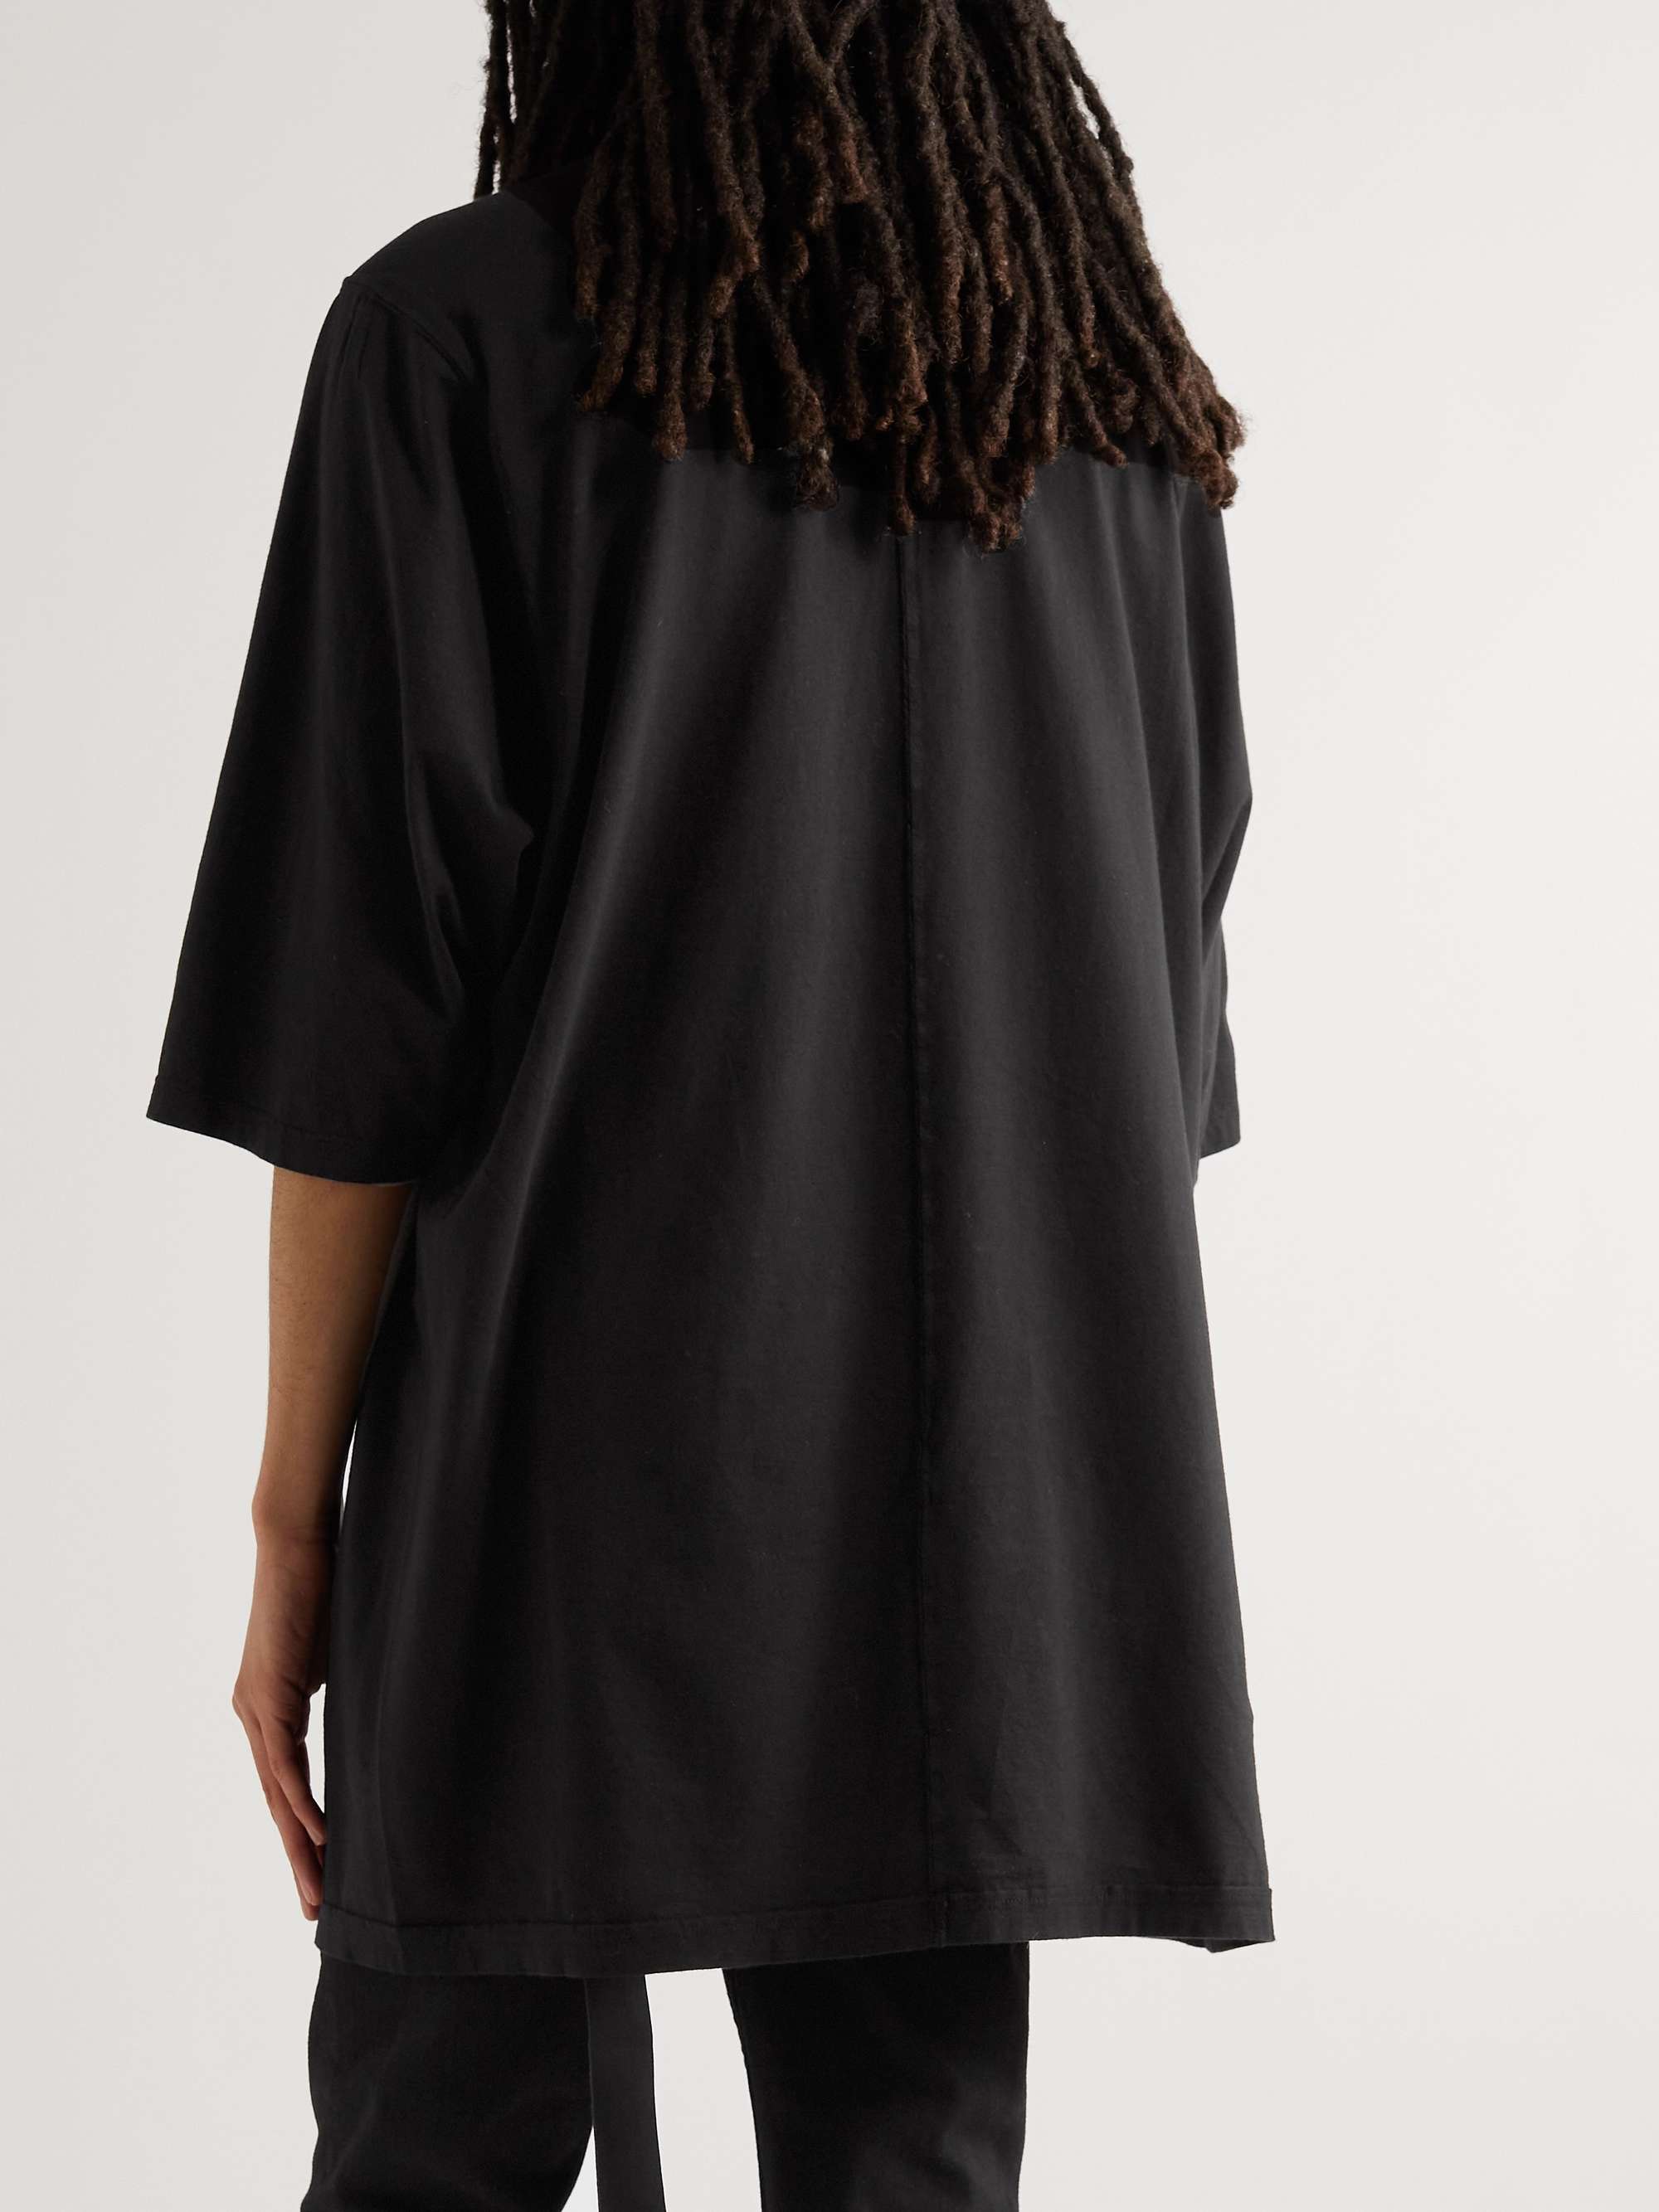 DRKSHDW BY RICK OWENS Printed Cotton-Jersey T-Shirt